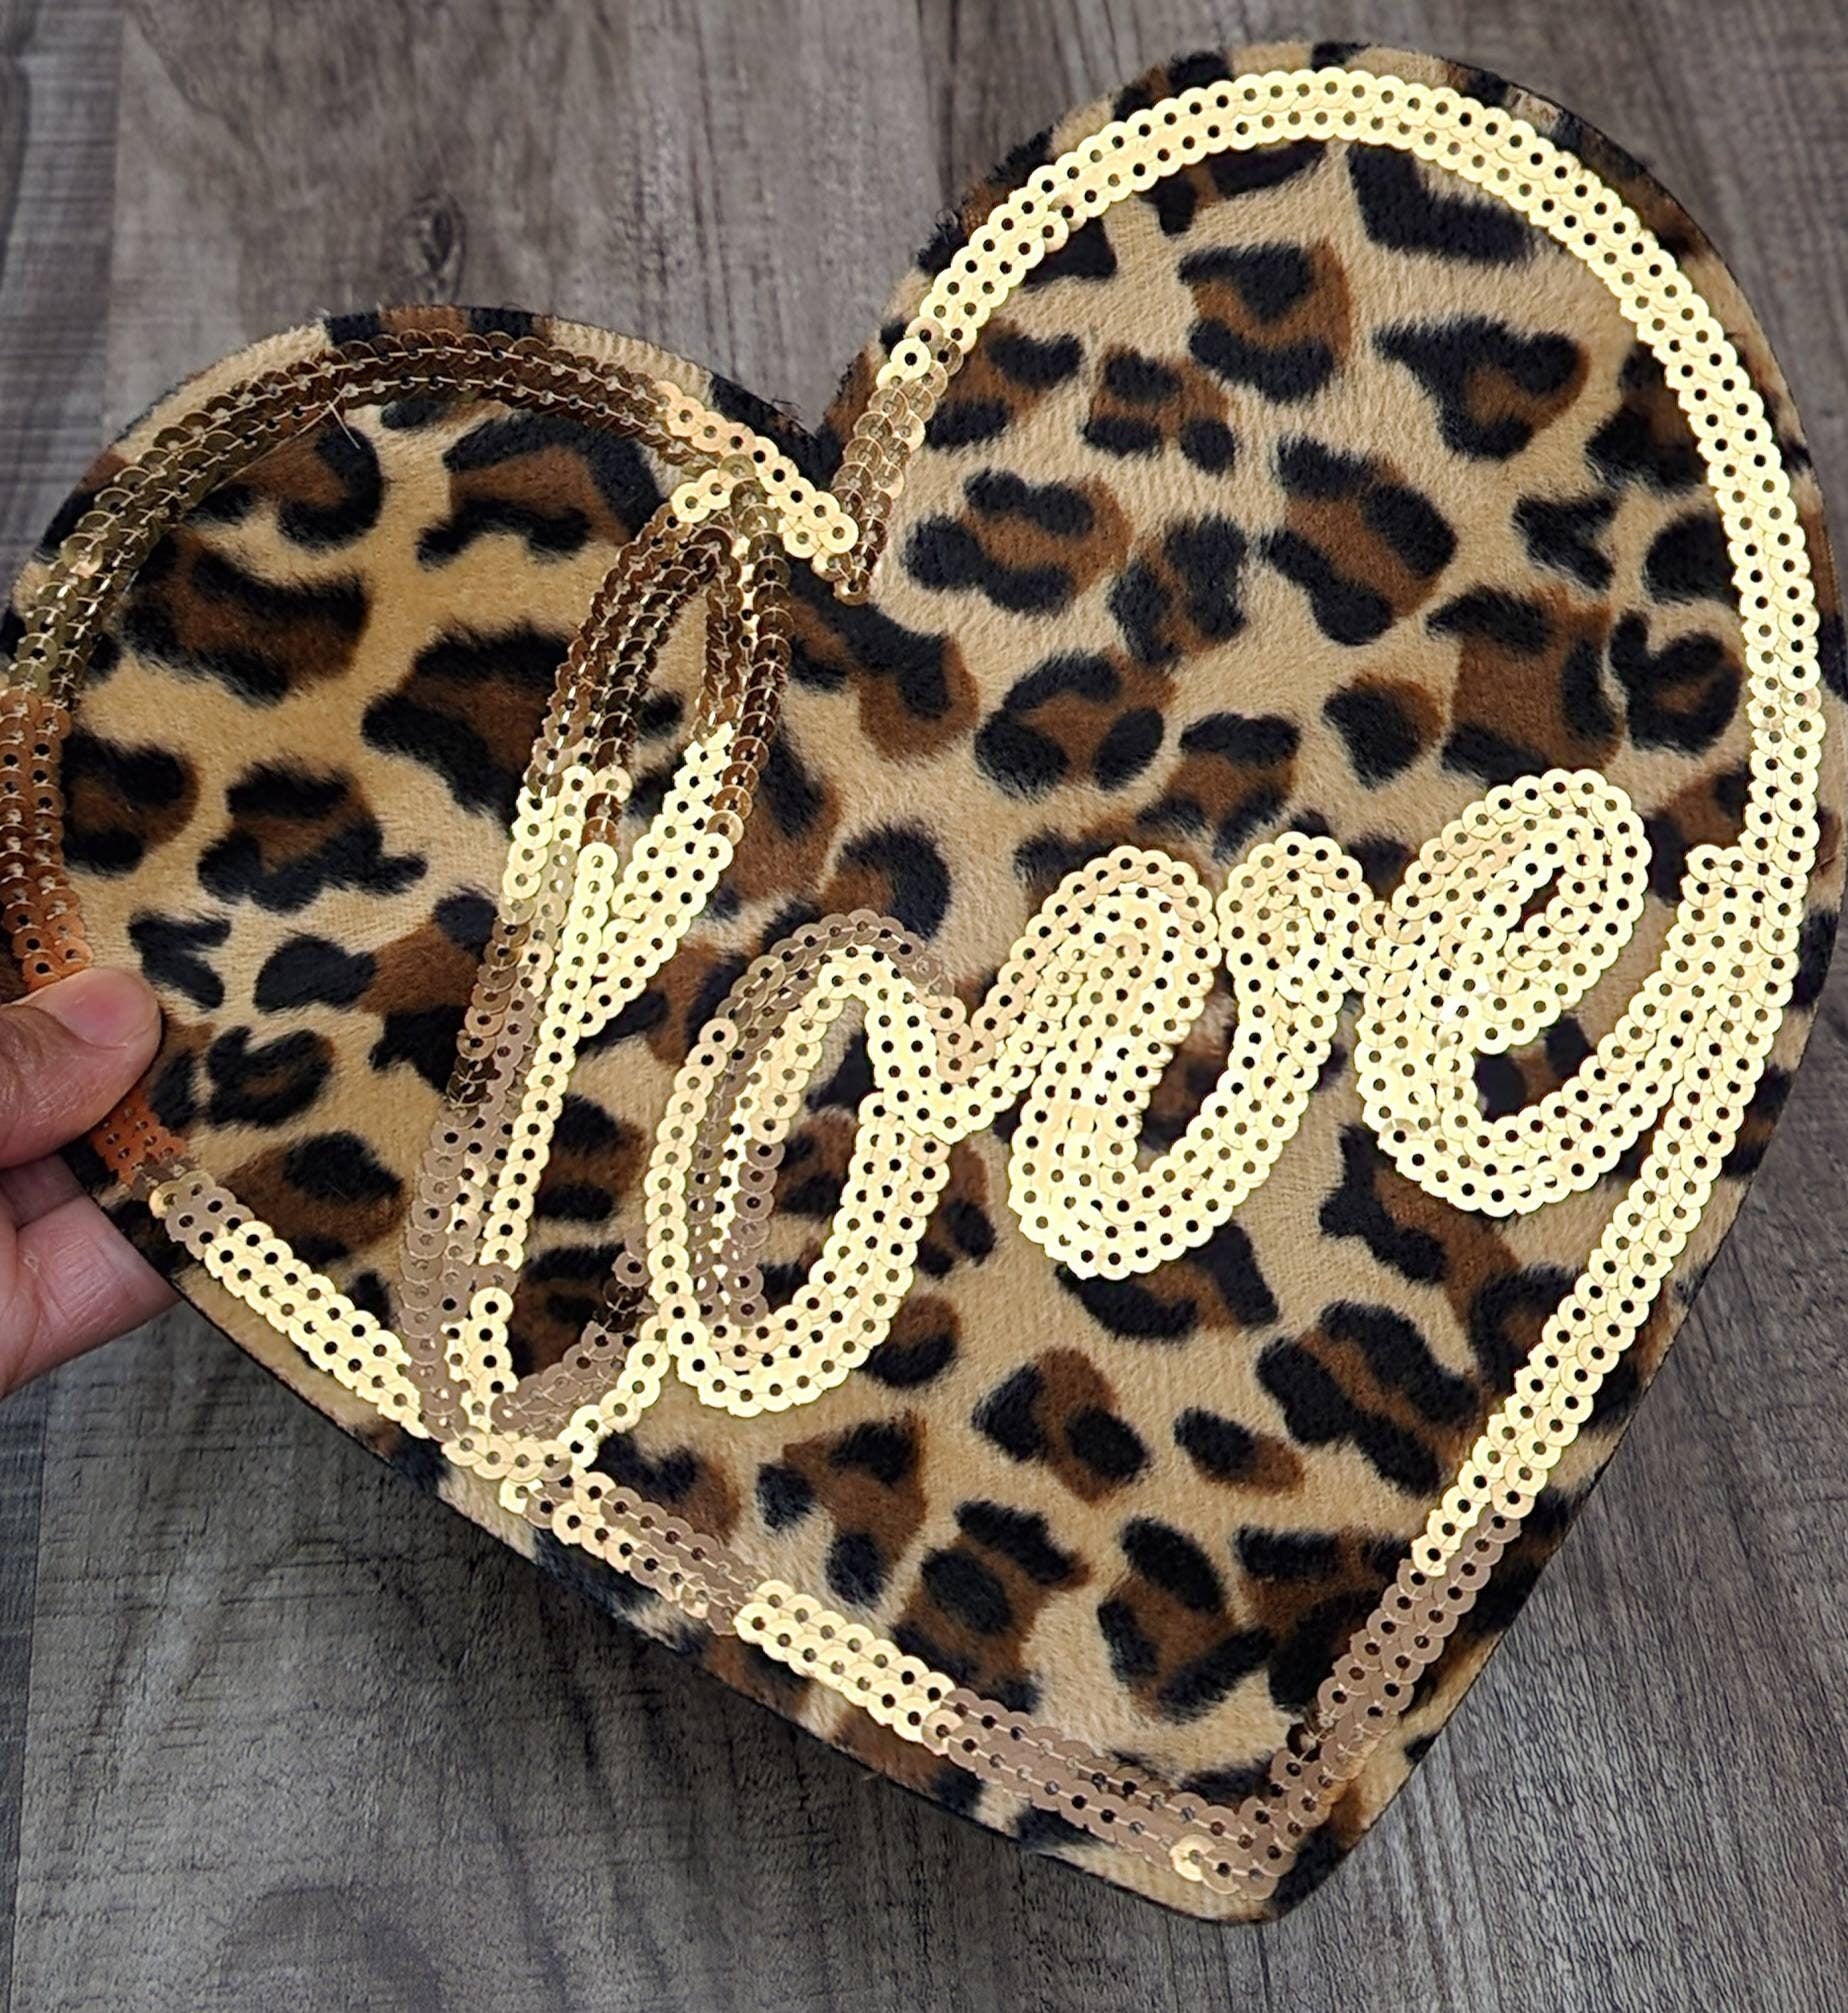 Sparkling Velvet & Sequins Leopard "Love" Heart, Size 10"x9" Sew-On Applique for Clothing and Accessories, Fuzzy Patch, Large Jacket Patch